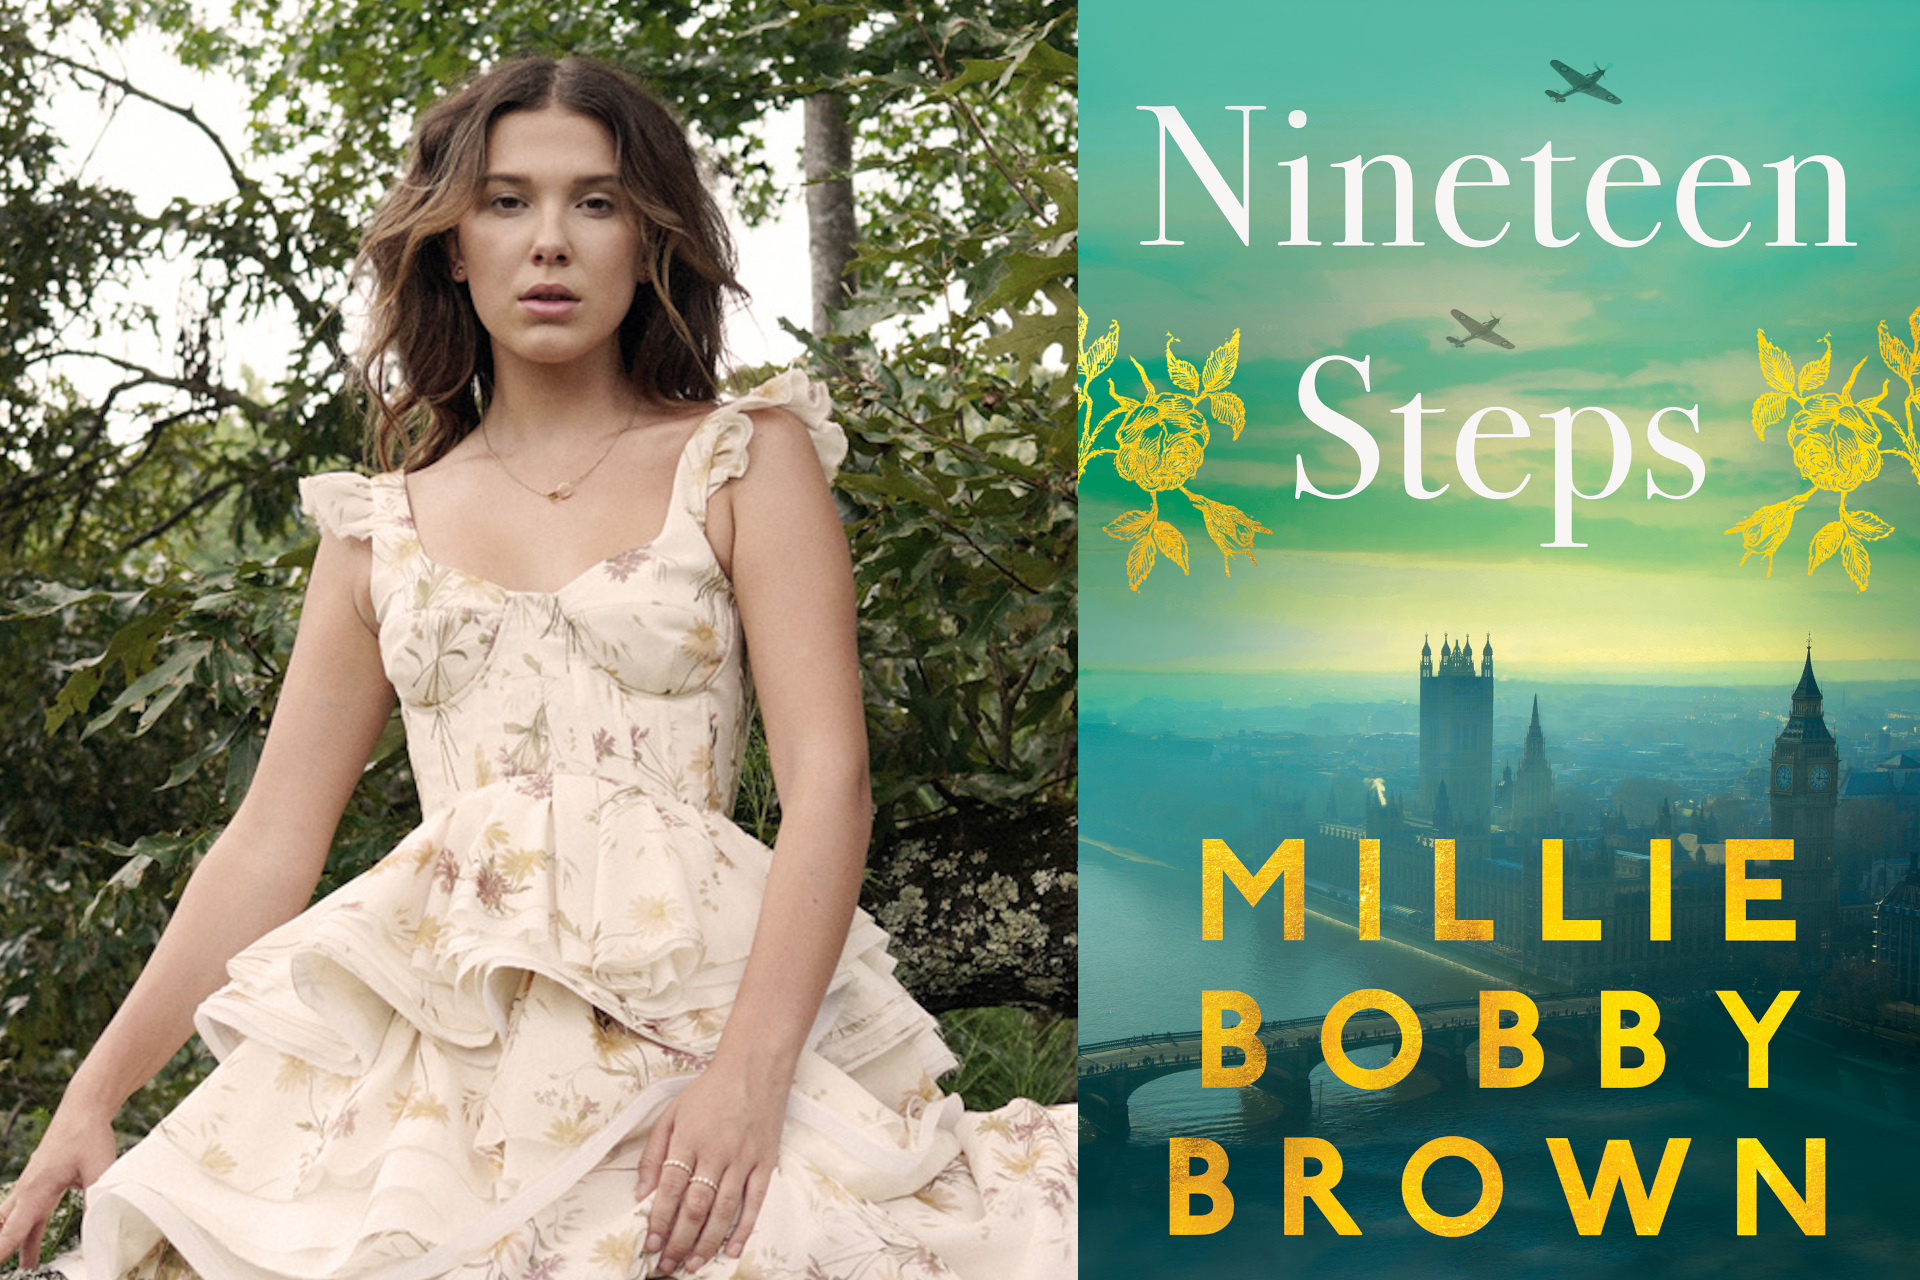 Millie Bobby Brown and Nineteen Steps book cover